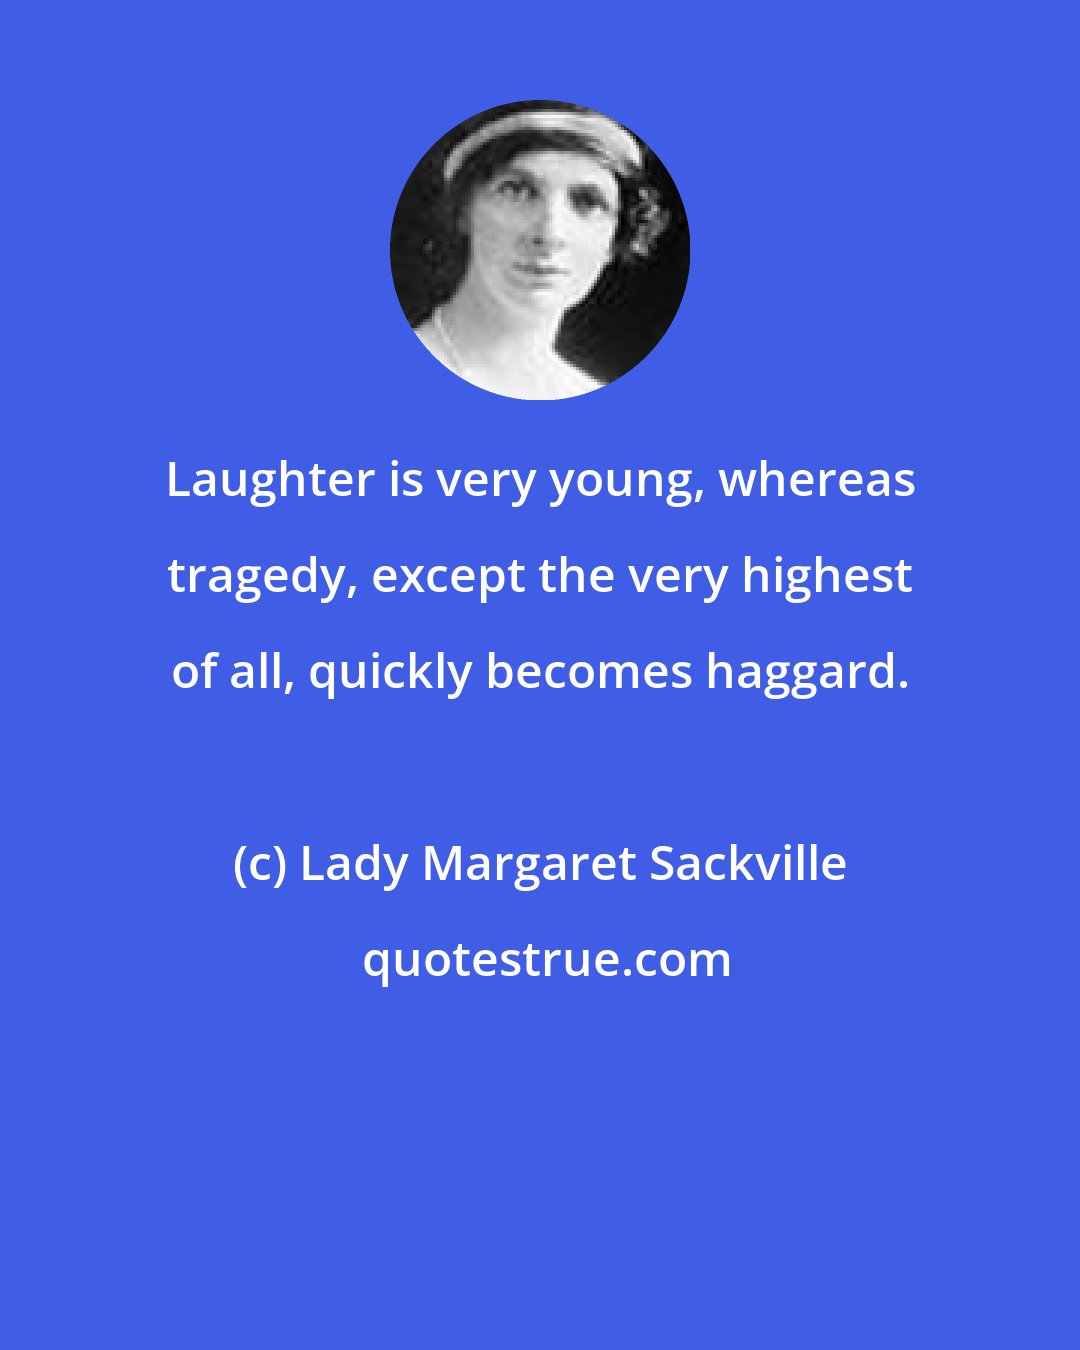 Lady Margaret Sackville: Laughter is very young, whereas tragedy, except the very highest of all, quickly becomes haggard.